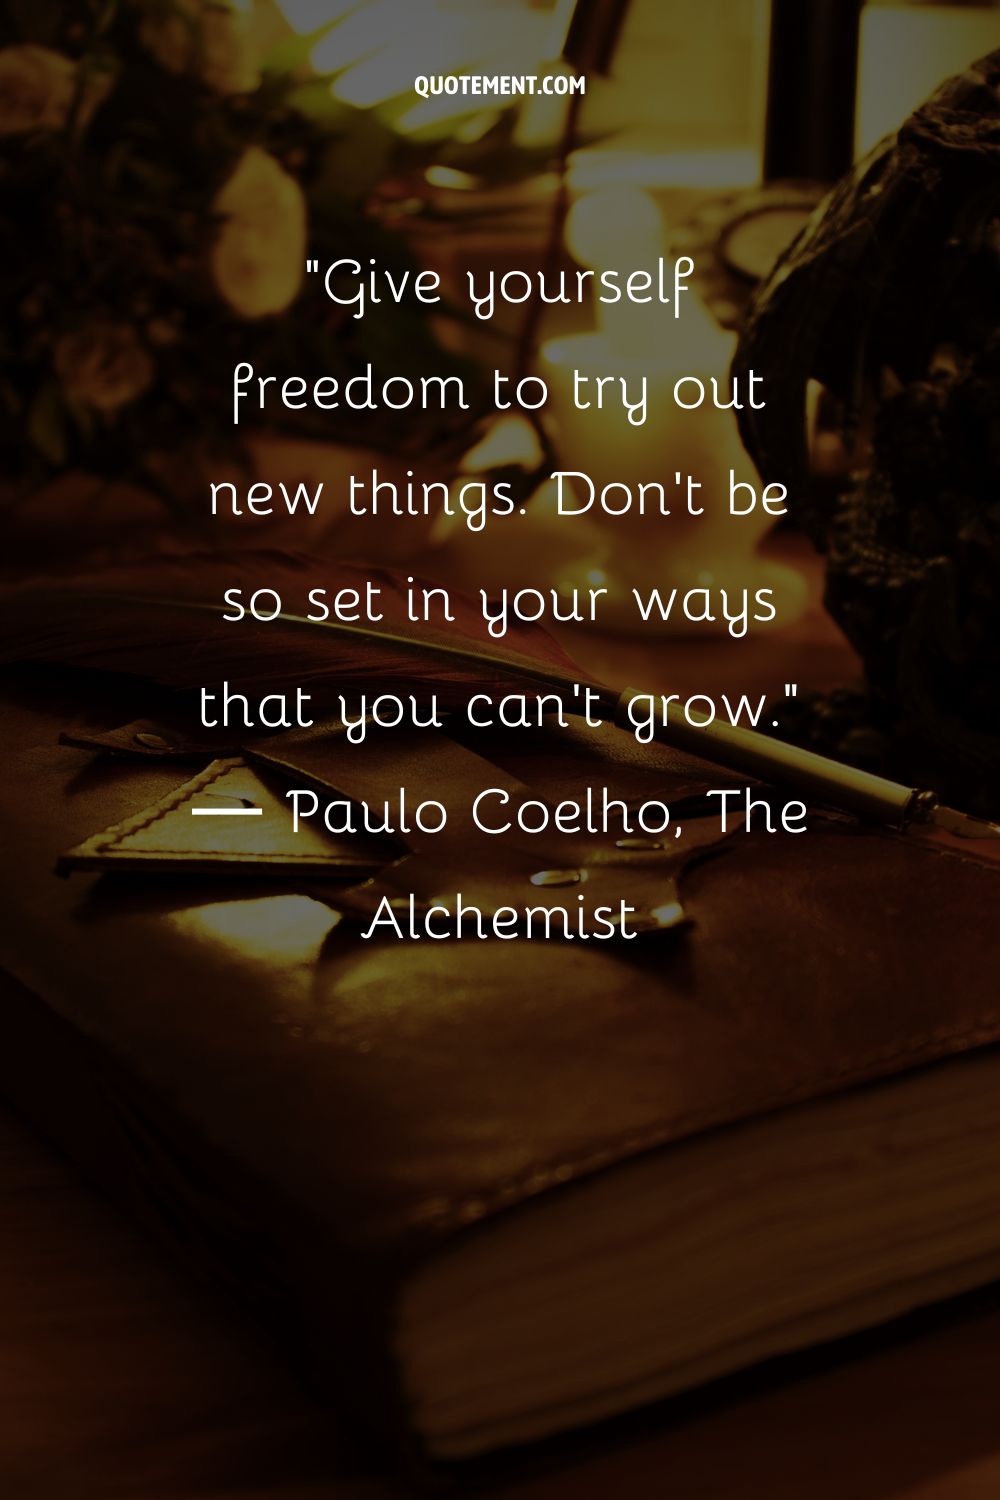 Give yourself freedom to try out new things. Don't be so set in your ways that you can't grow